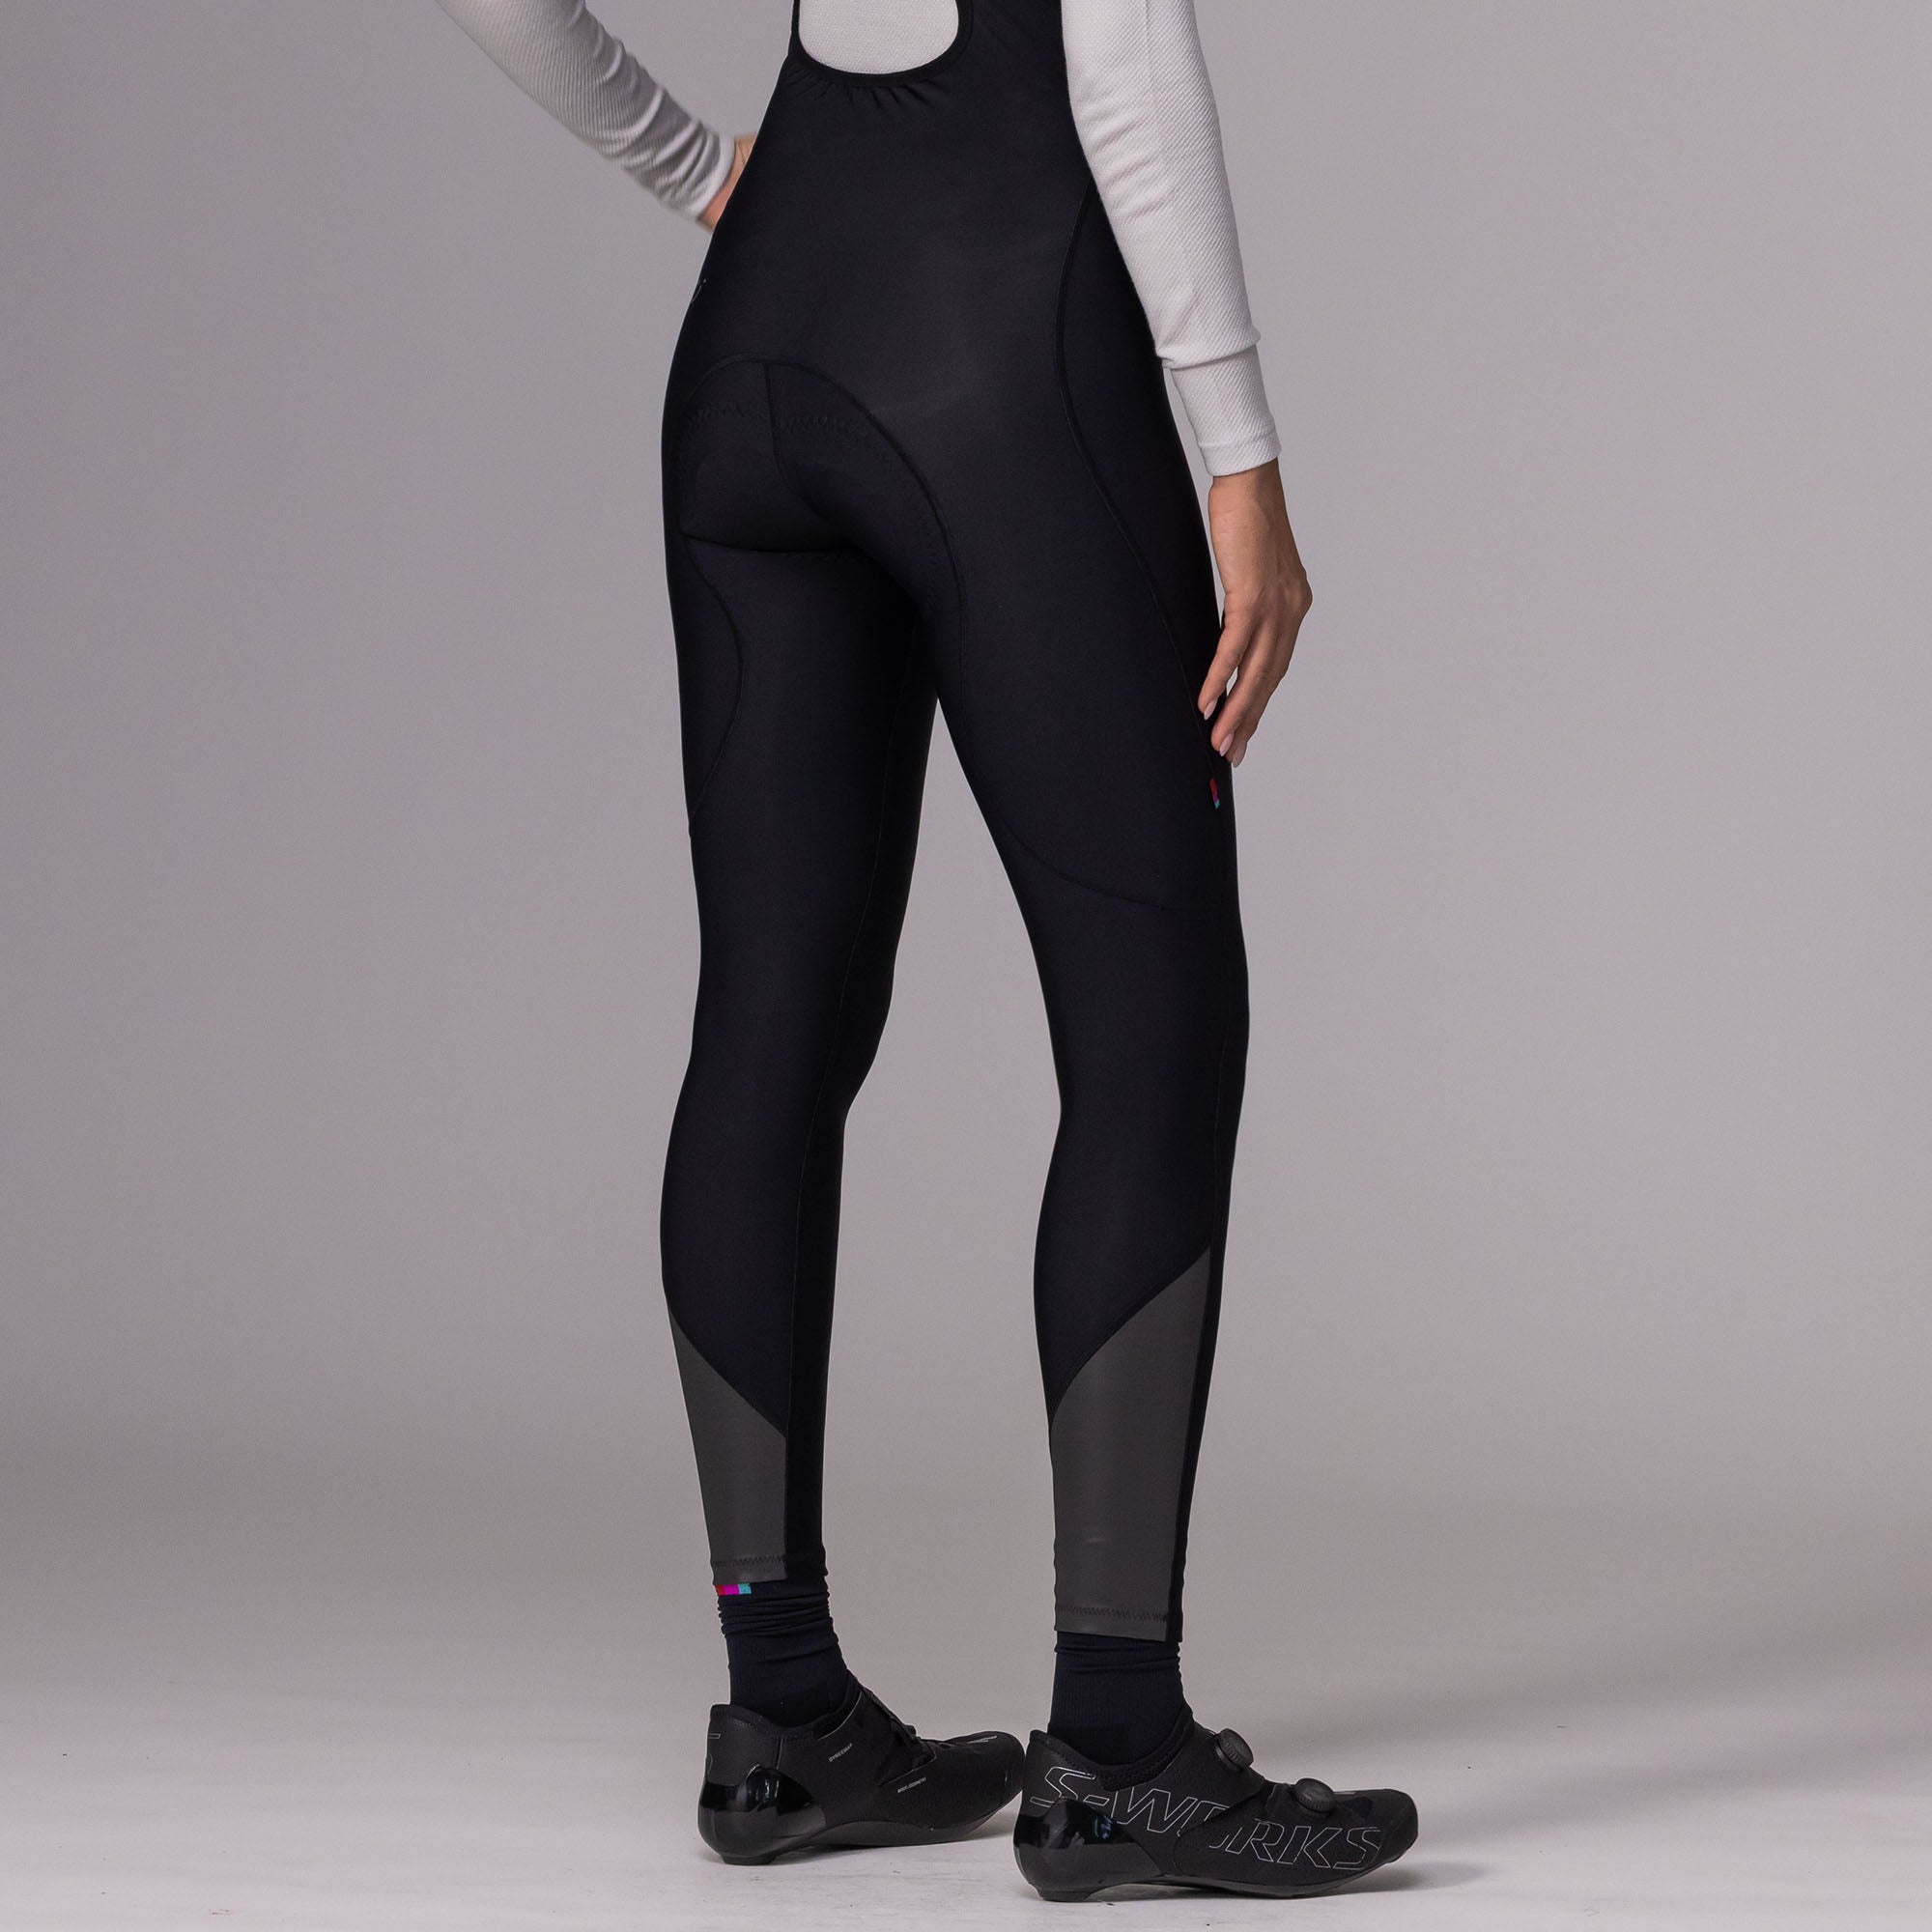 LUSSO Nitelife Repel Thermal Bib Tights v.2 (with pad)